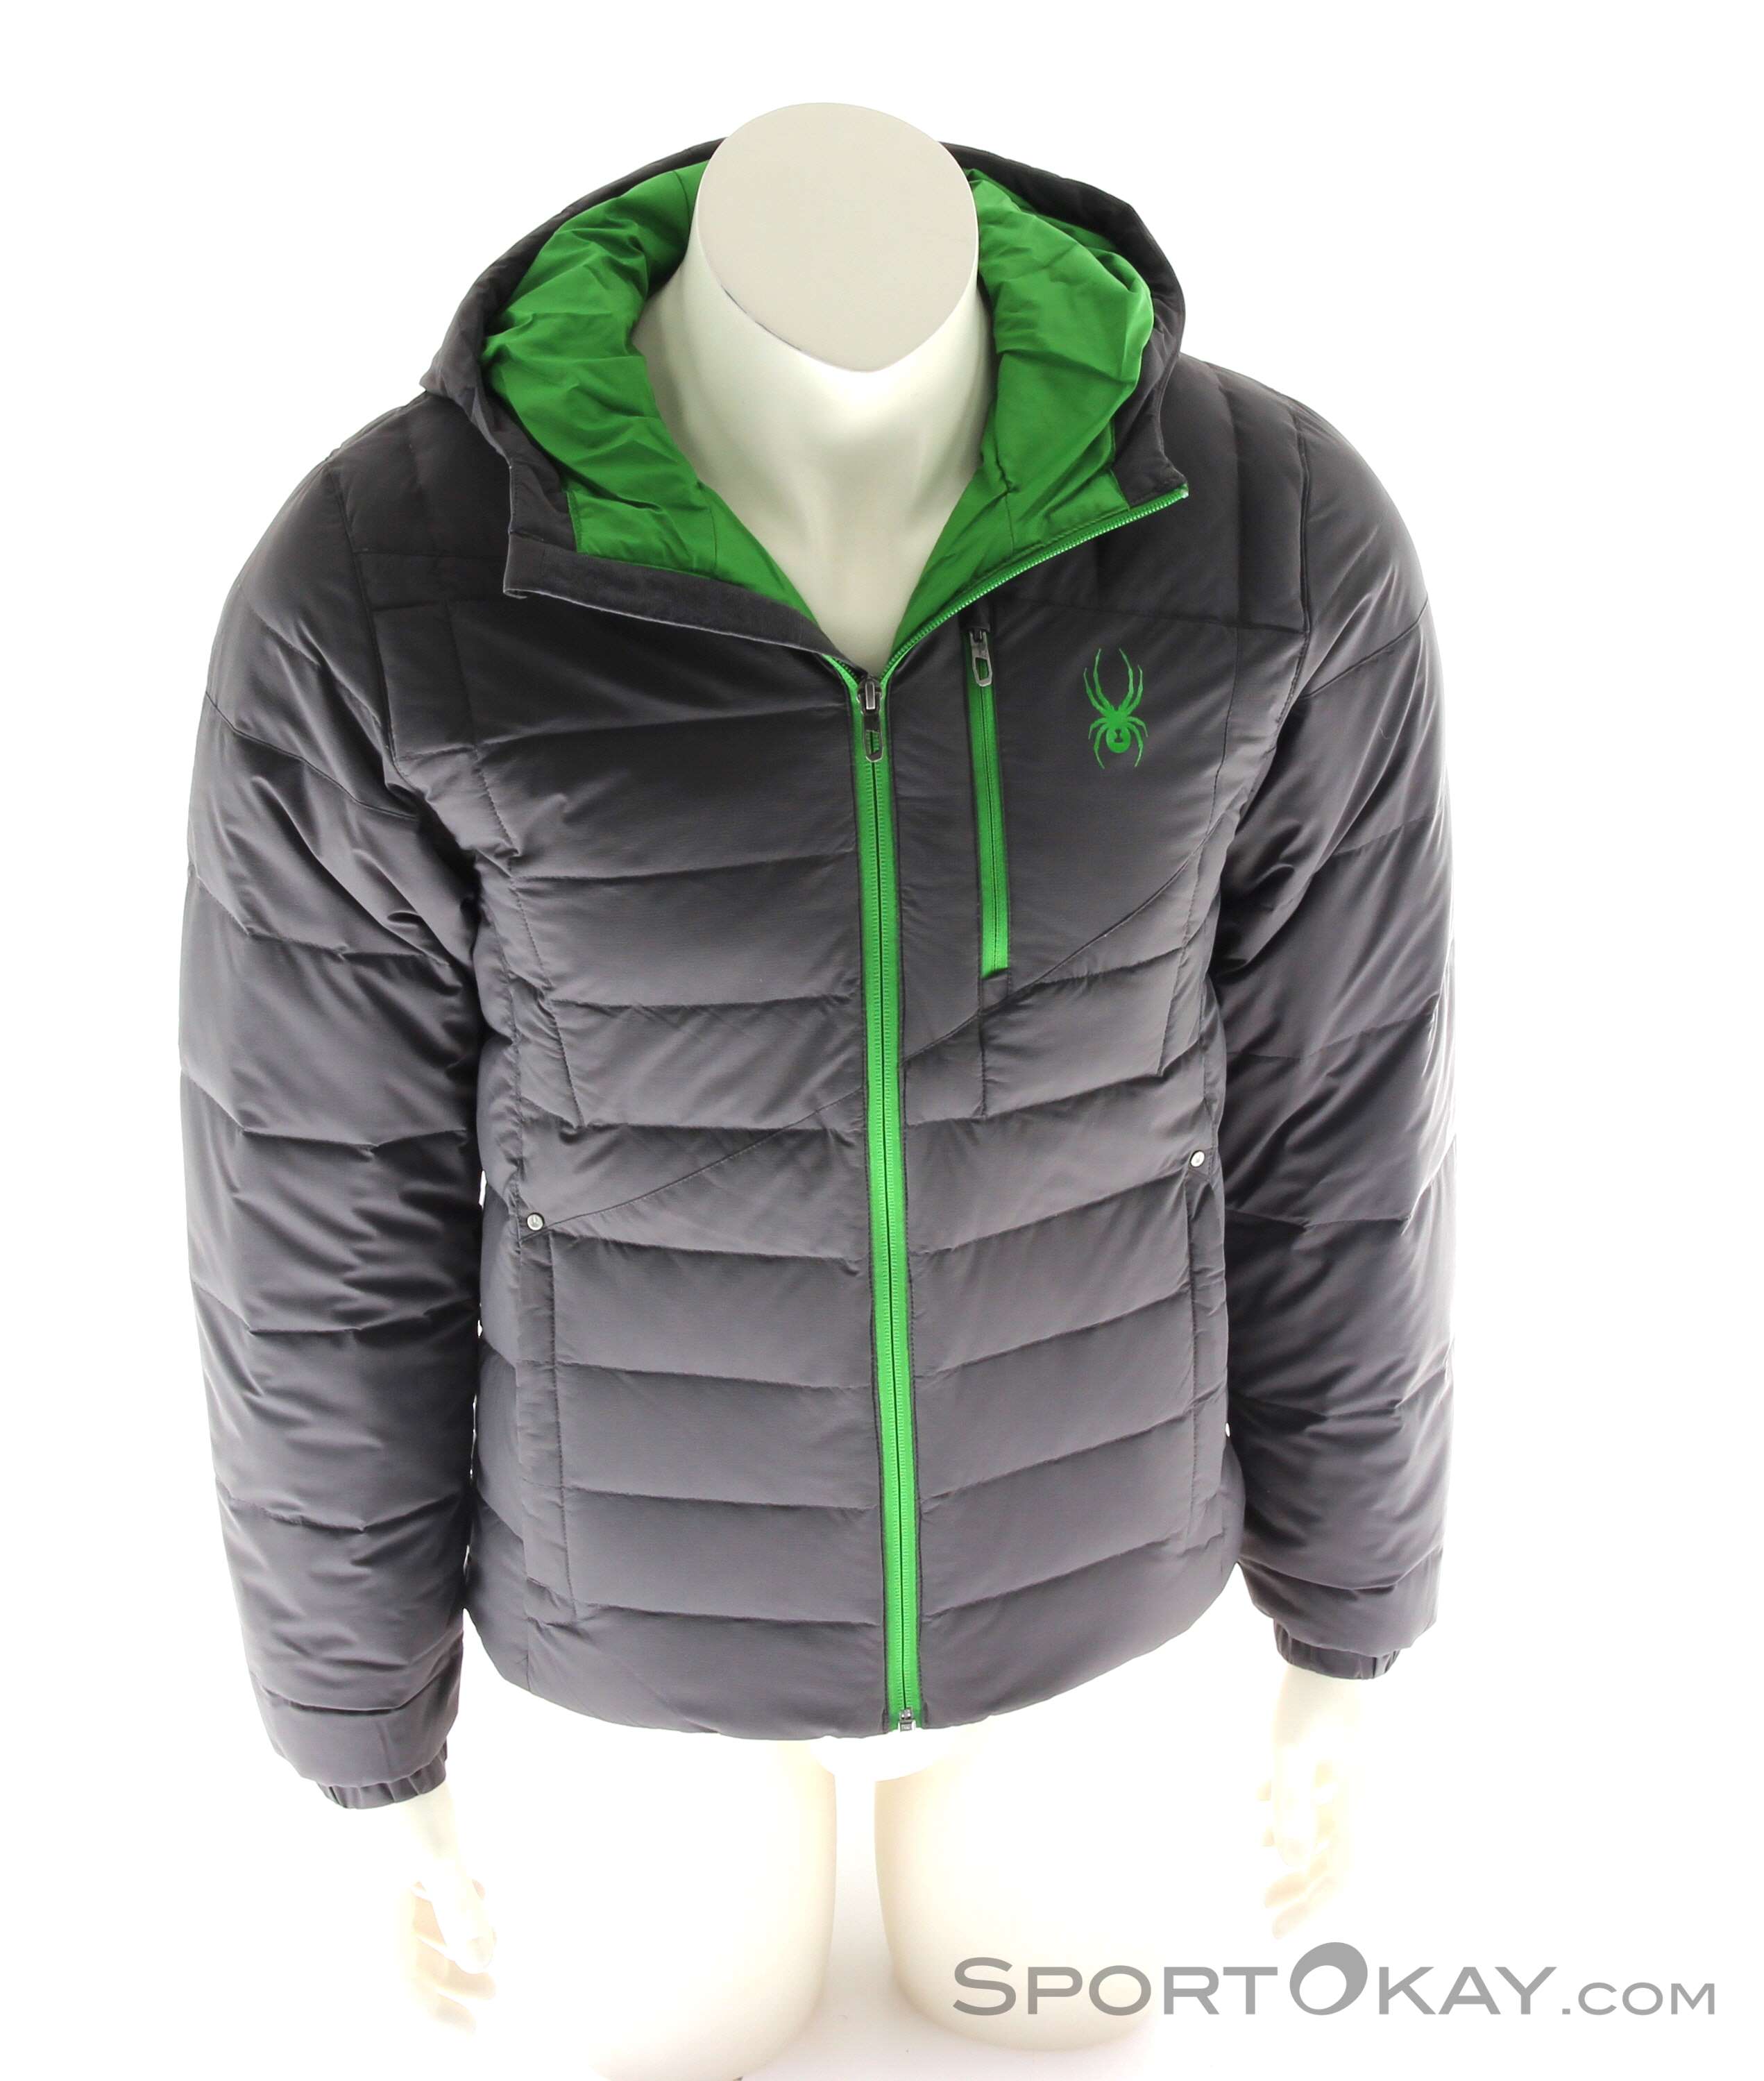 Objector stabil Sæbe Spyder FZ Dolomite Hoody Mens Outdoor Jacket - Jackets - Outdoor Clothing -  Outdoor - All